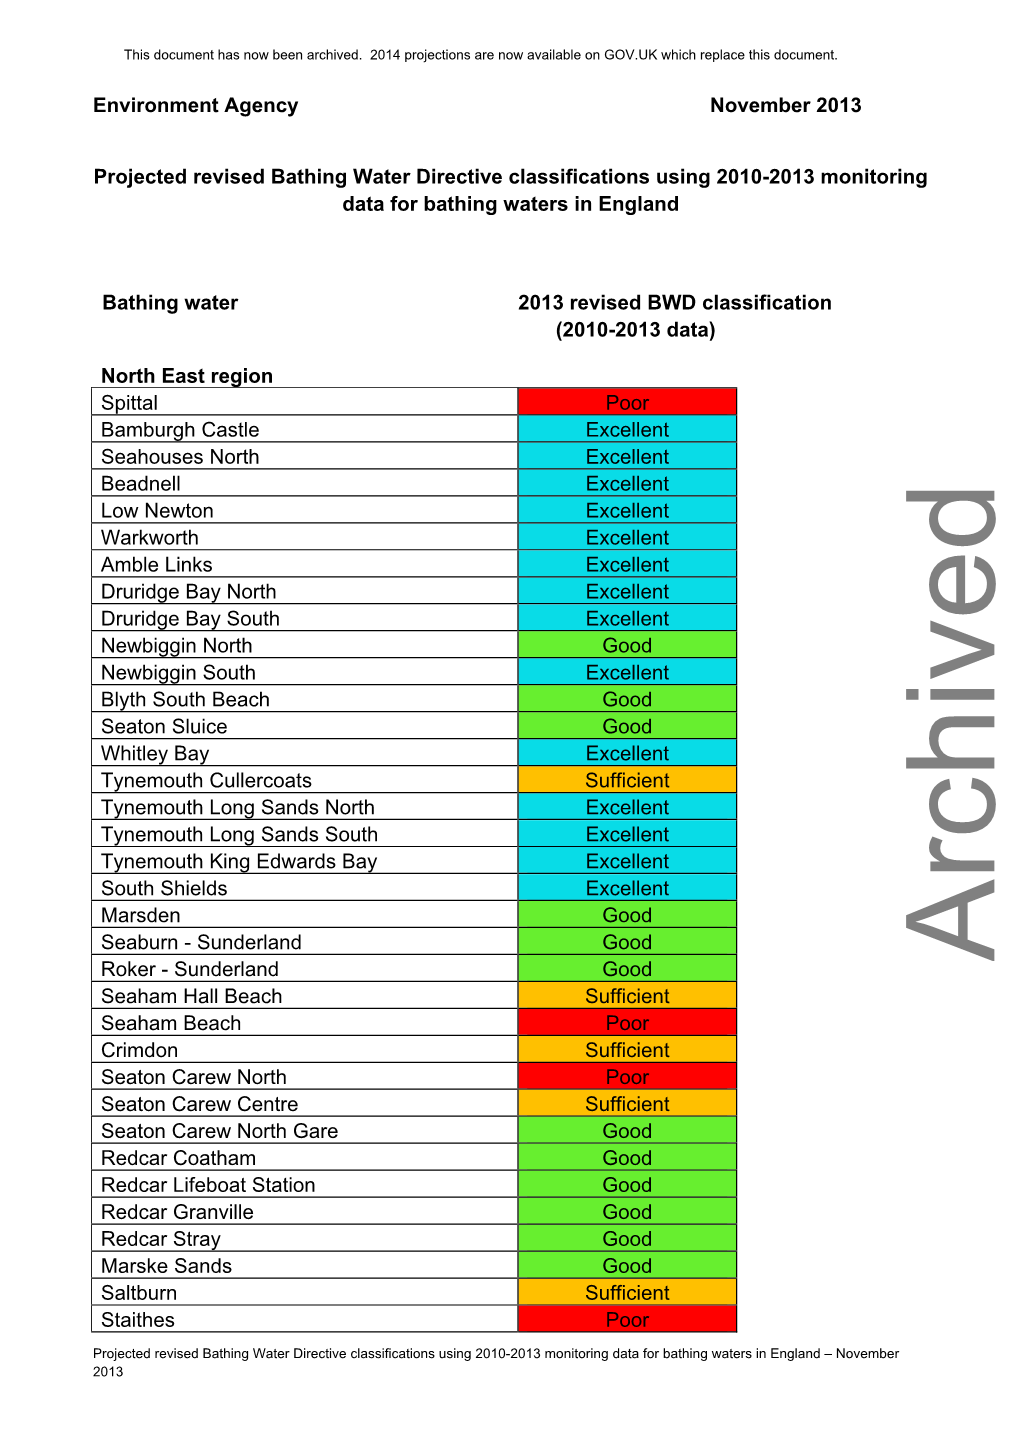 Projected Revised Bathing Water Directive Classifications Using 2010-2013 Monitoring Data for Bathing Waters in England